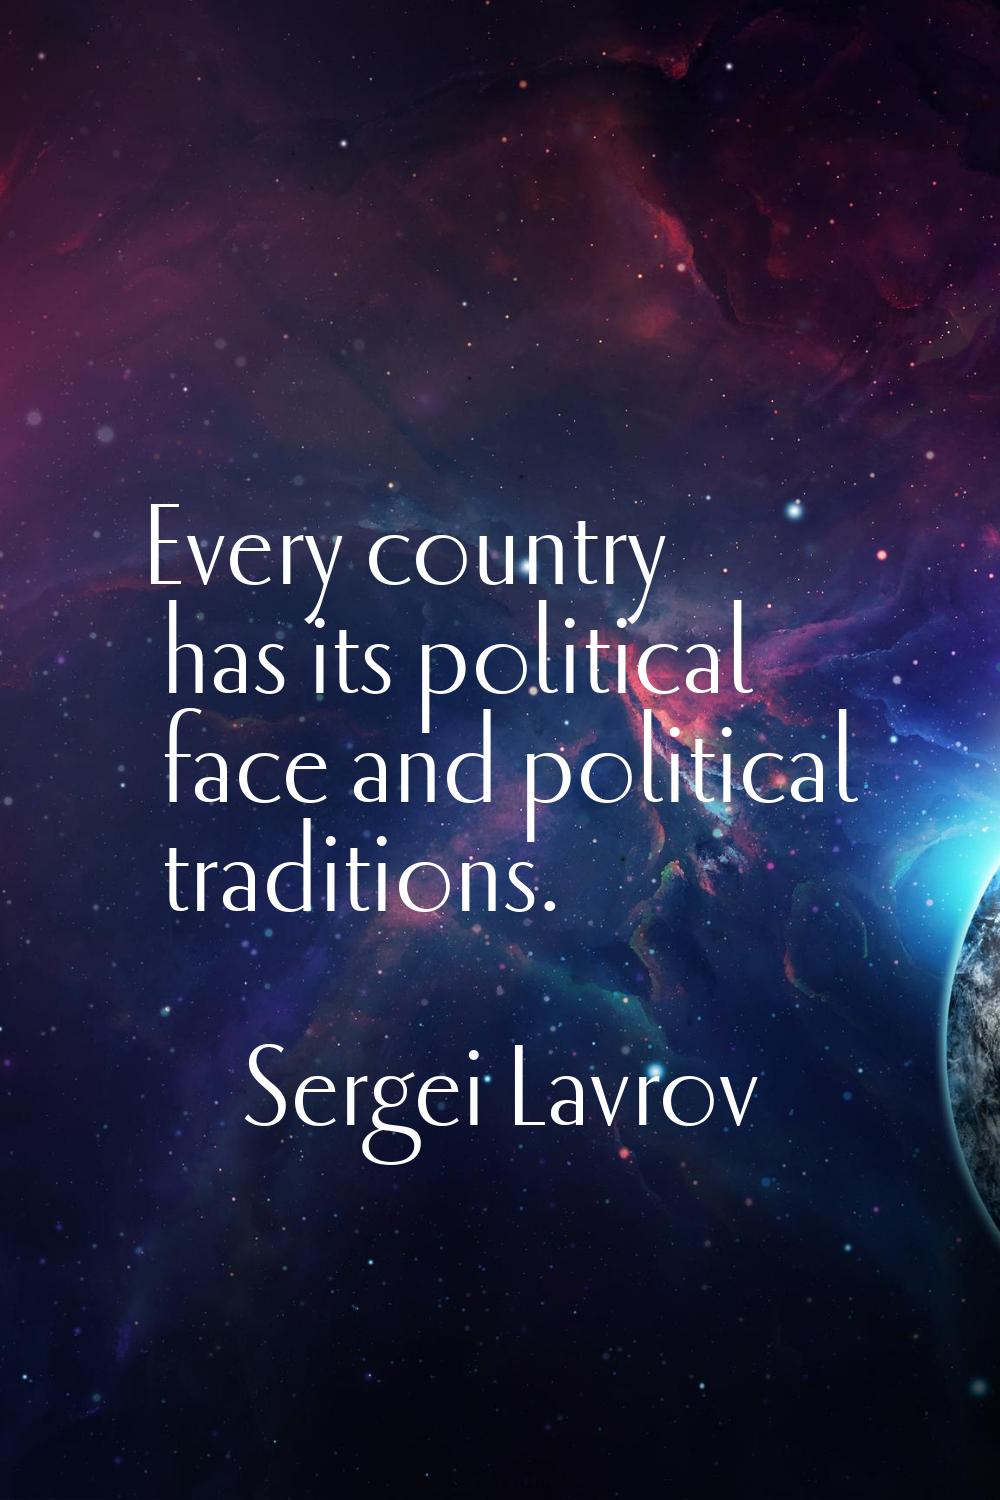 Every country has its political face and political traditions.